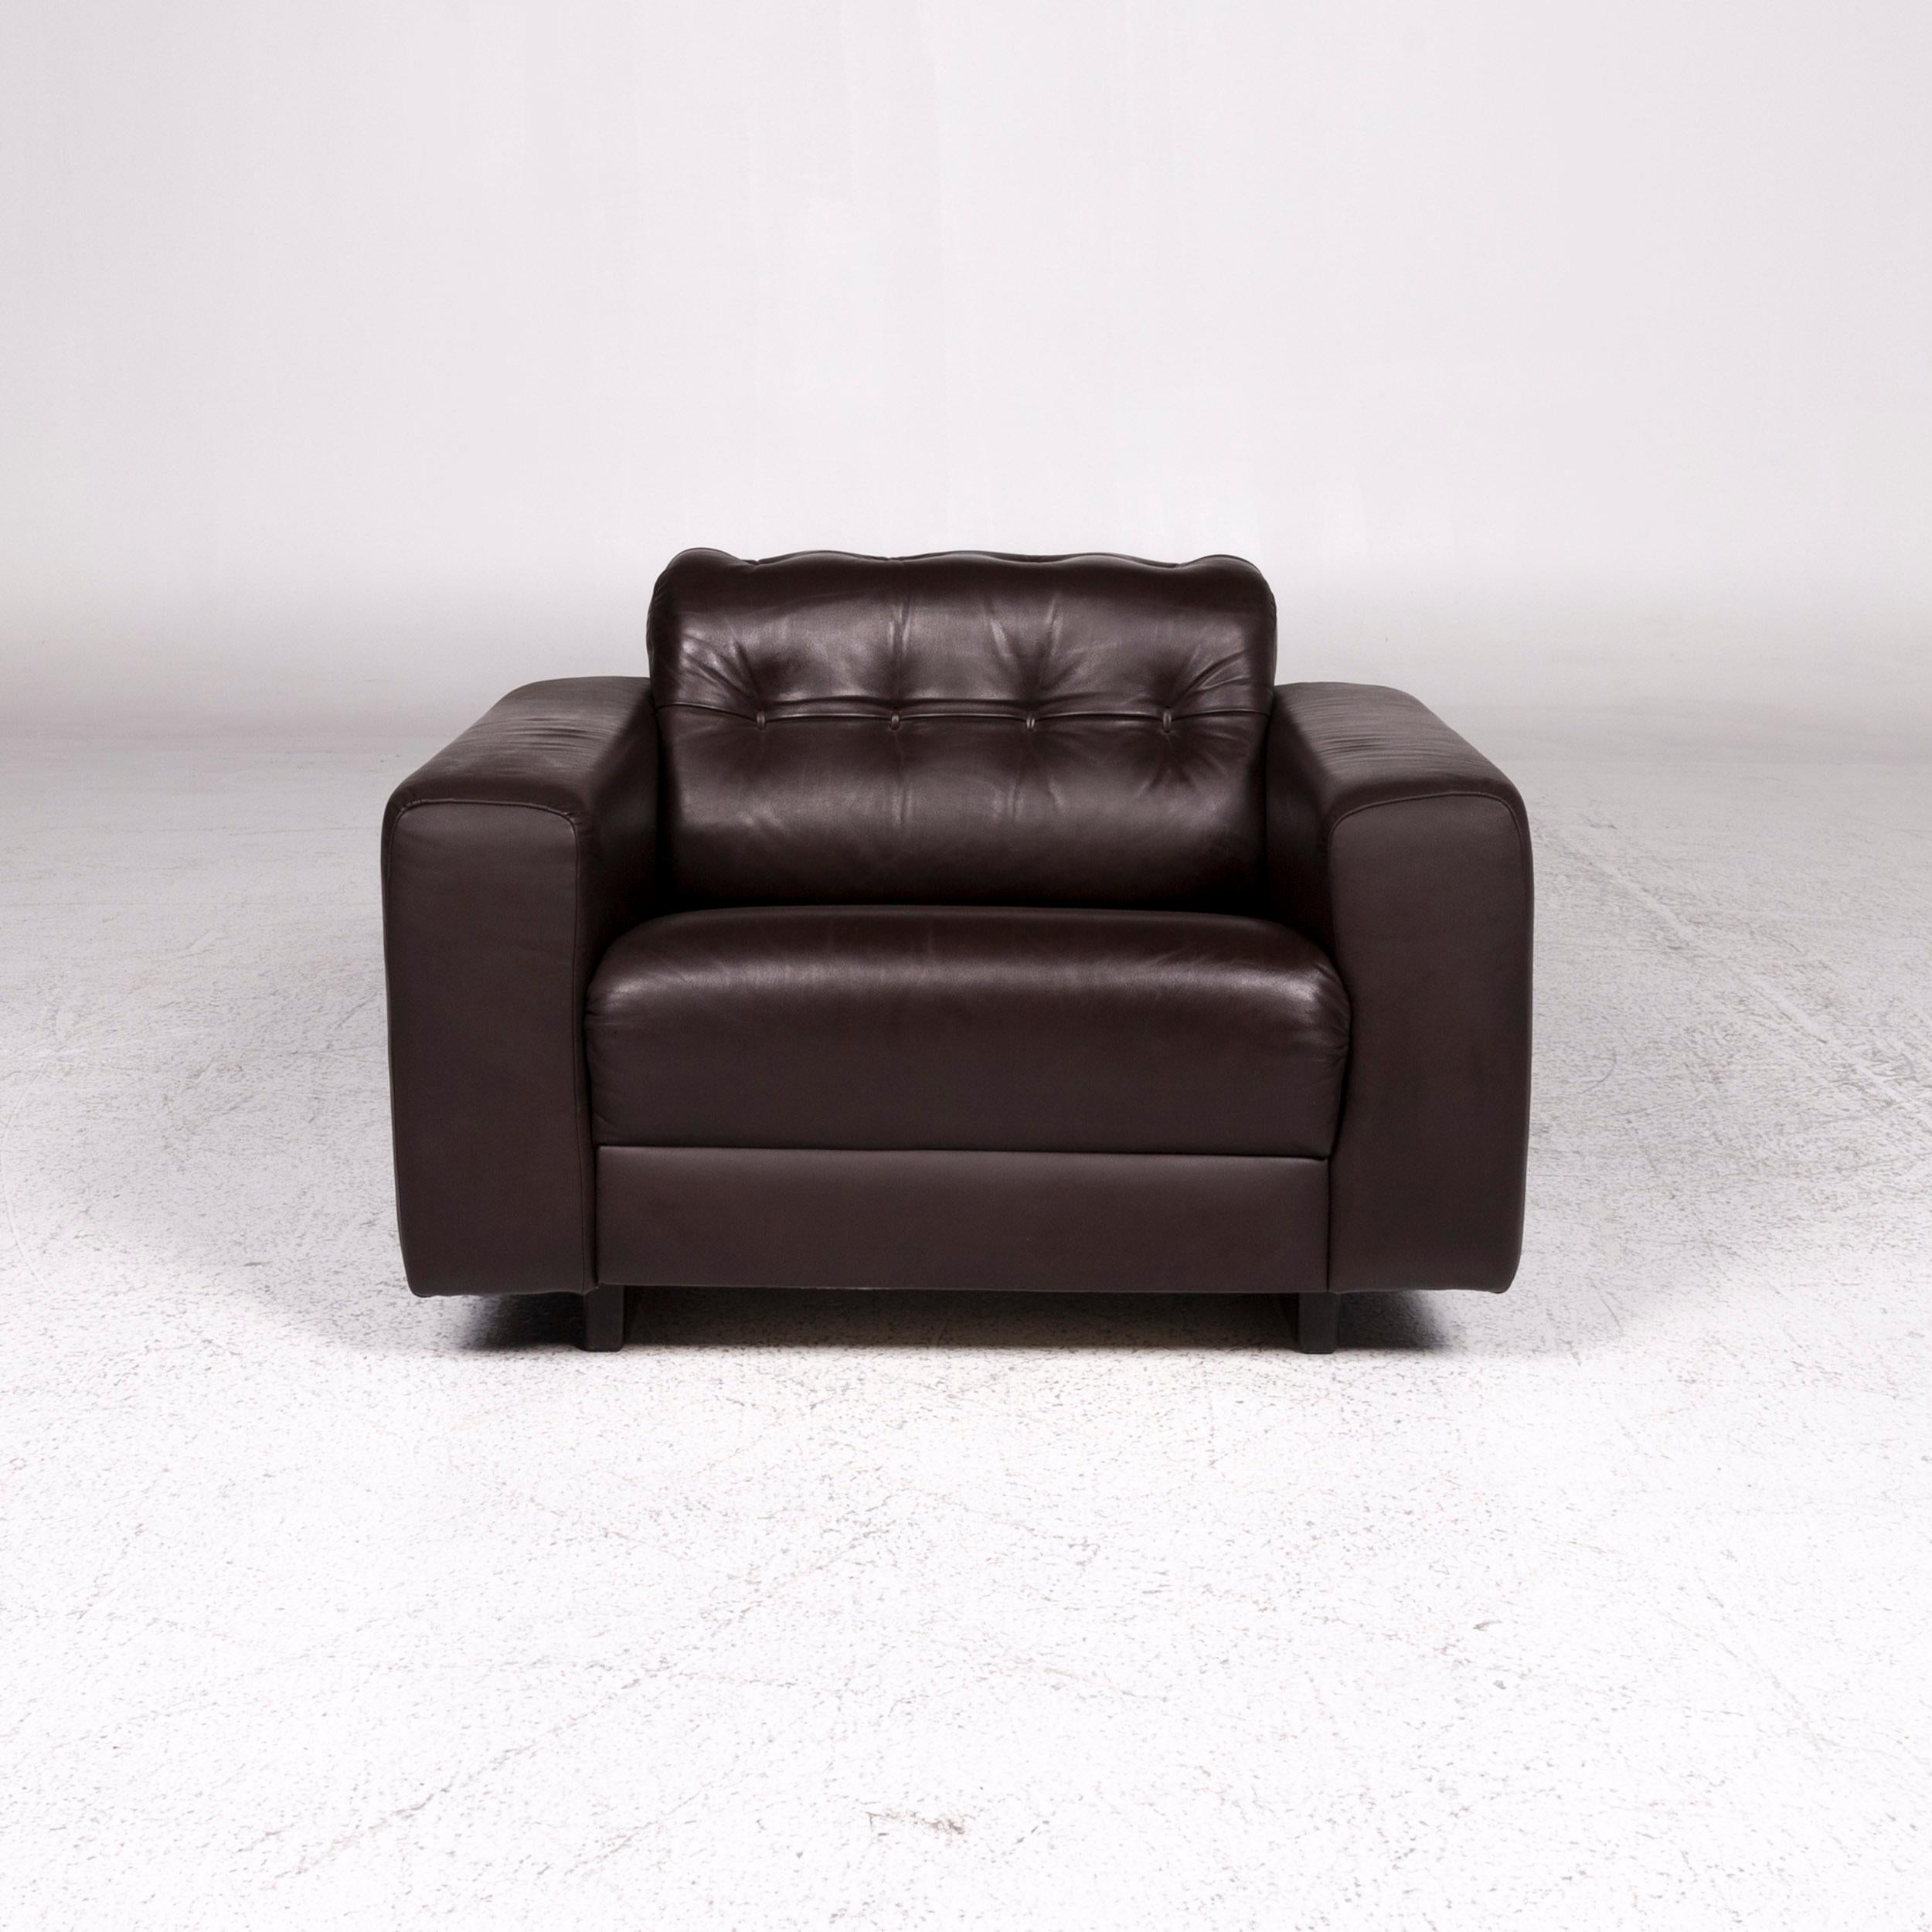 We bring to you a De Sede leather armchair brown.
 
 
 Product measurements in centimeters:
 
 Depth 82
Width 95
Height 64
Seat-height 38
Rest-height 52
Seat-depth 52
Seat-width 58
Back-height 33.